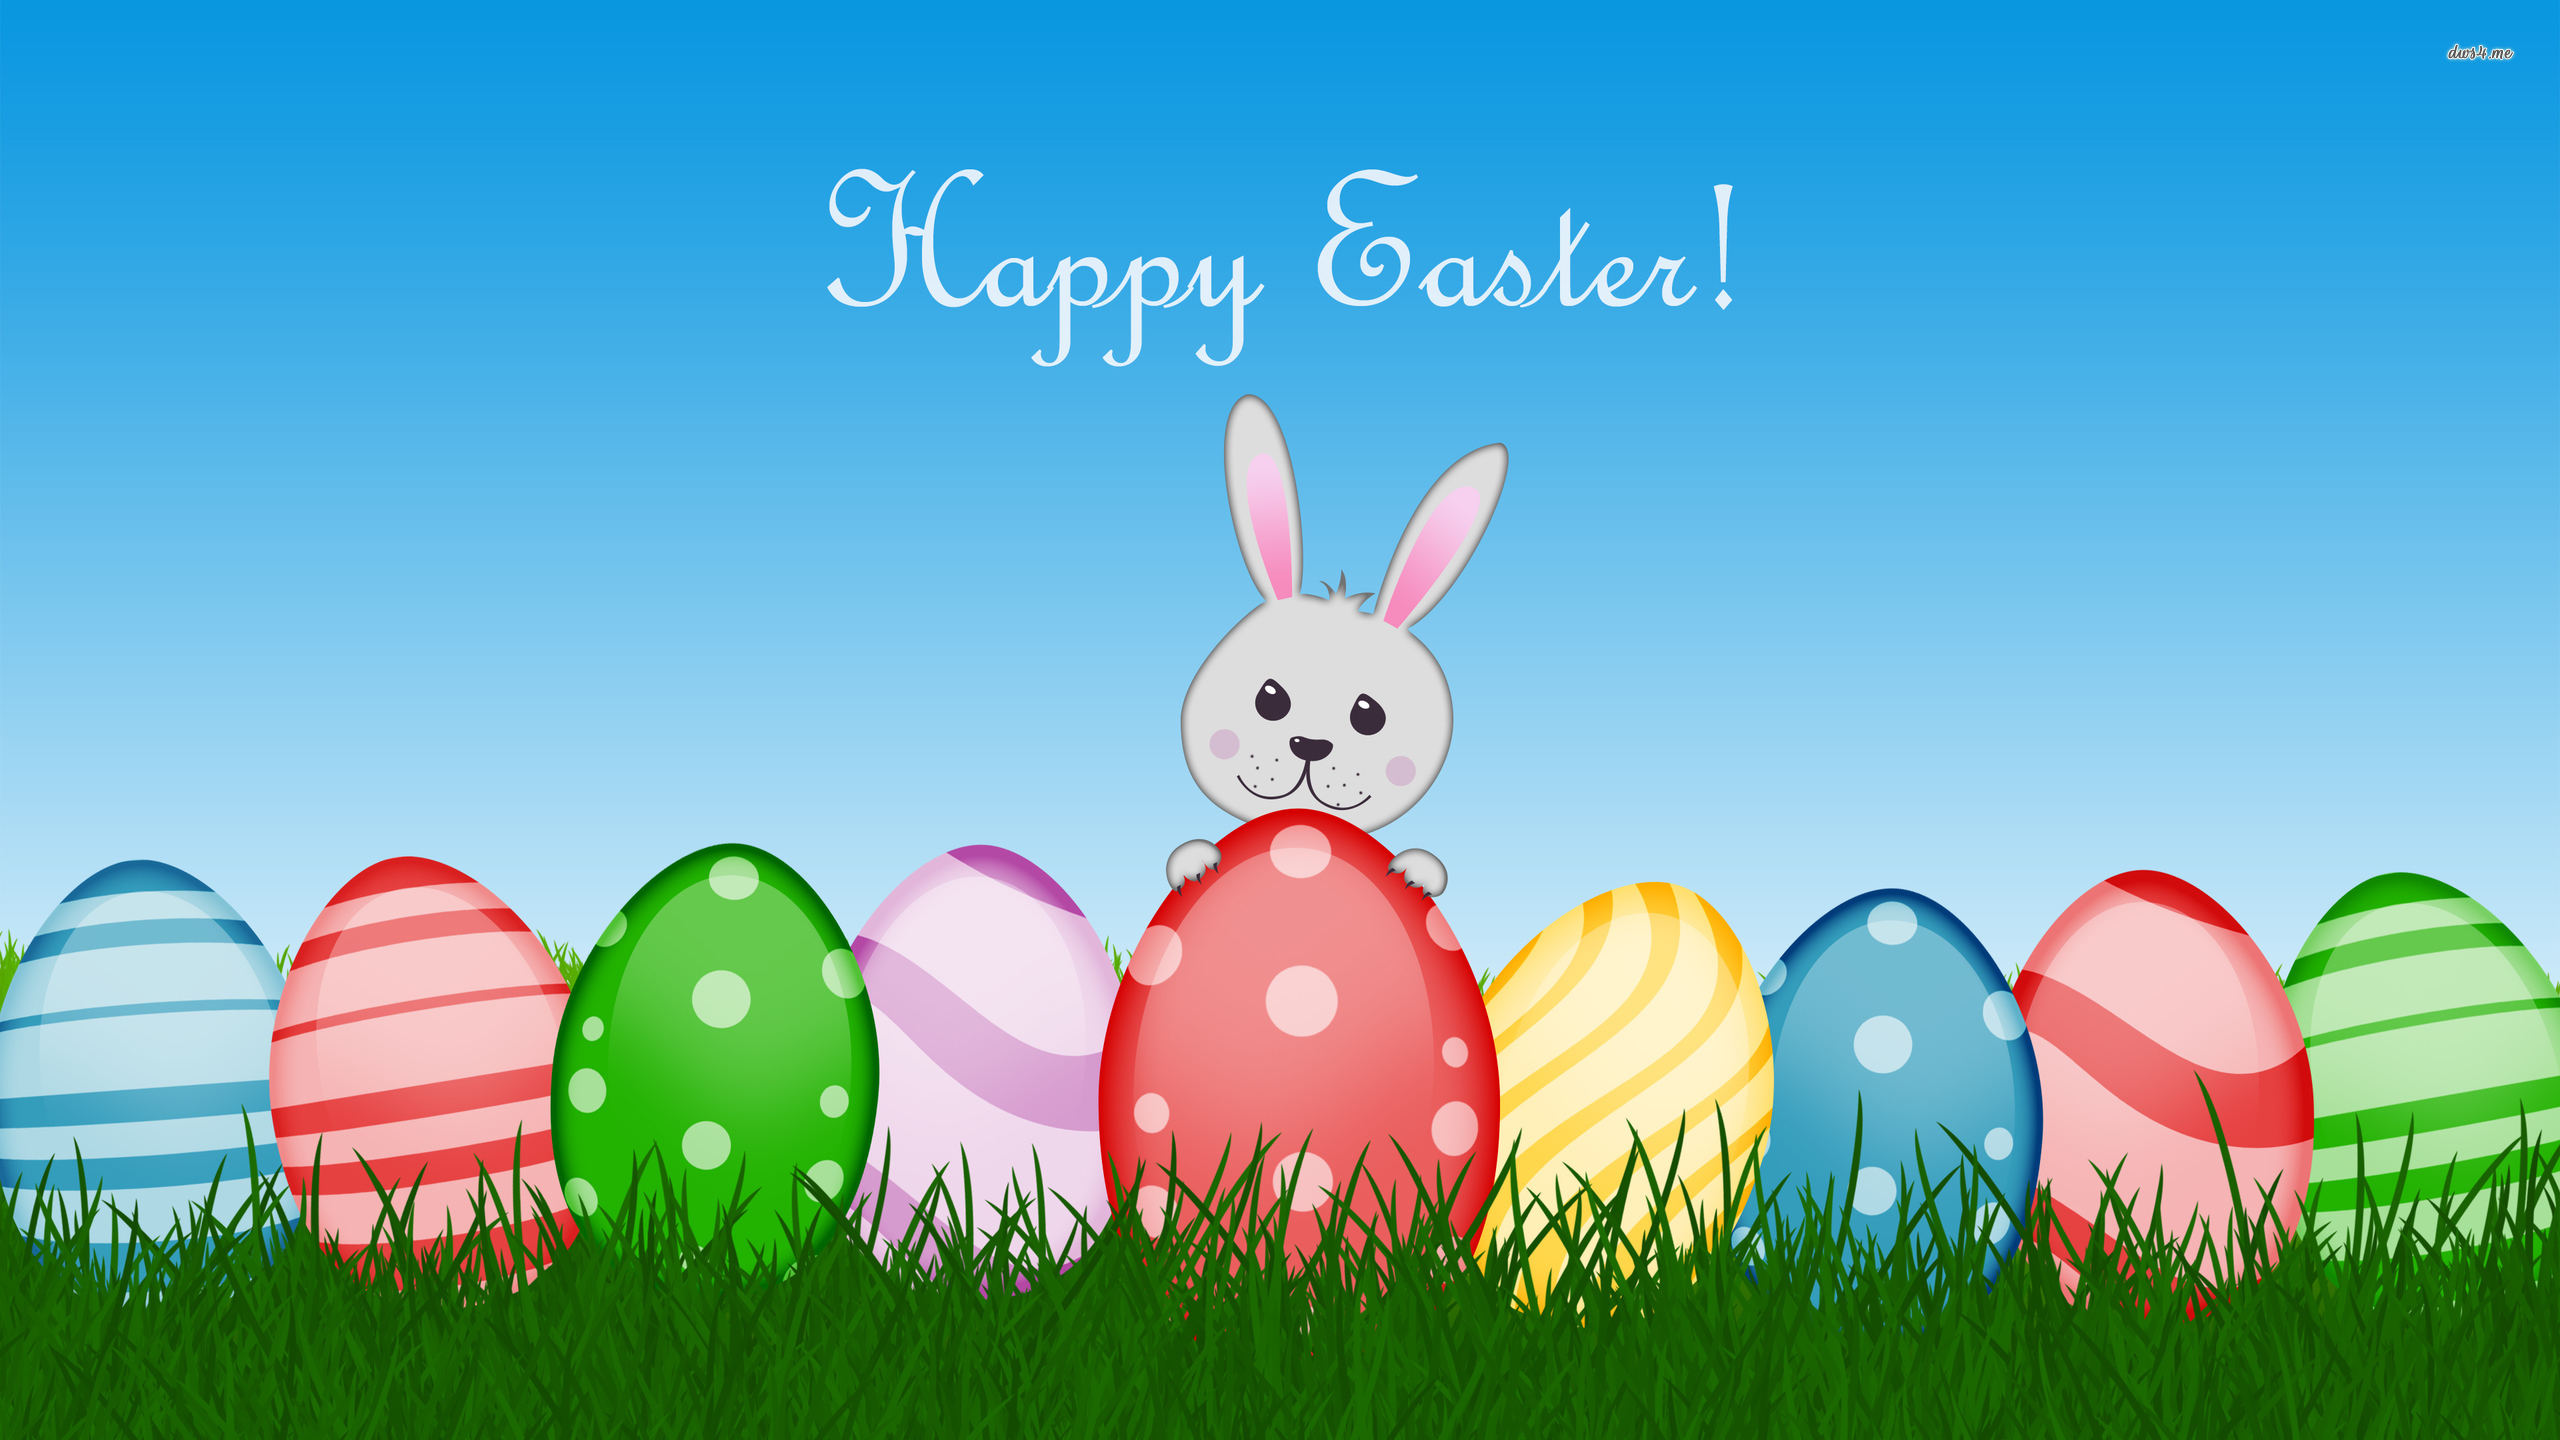 Free Cute Easter Wallpaper   Easter Bunny Hd Wallpapers